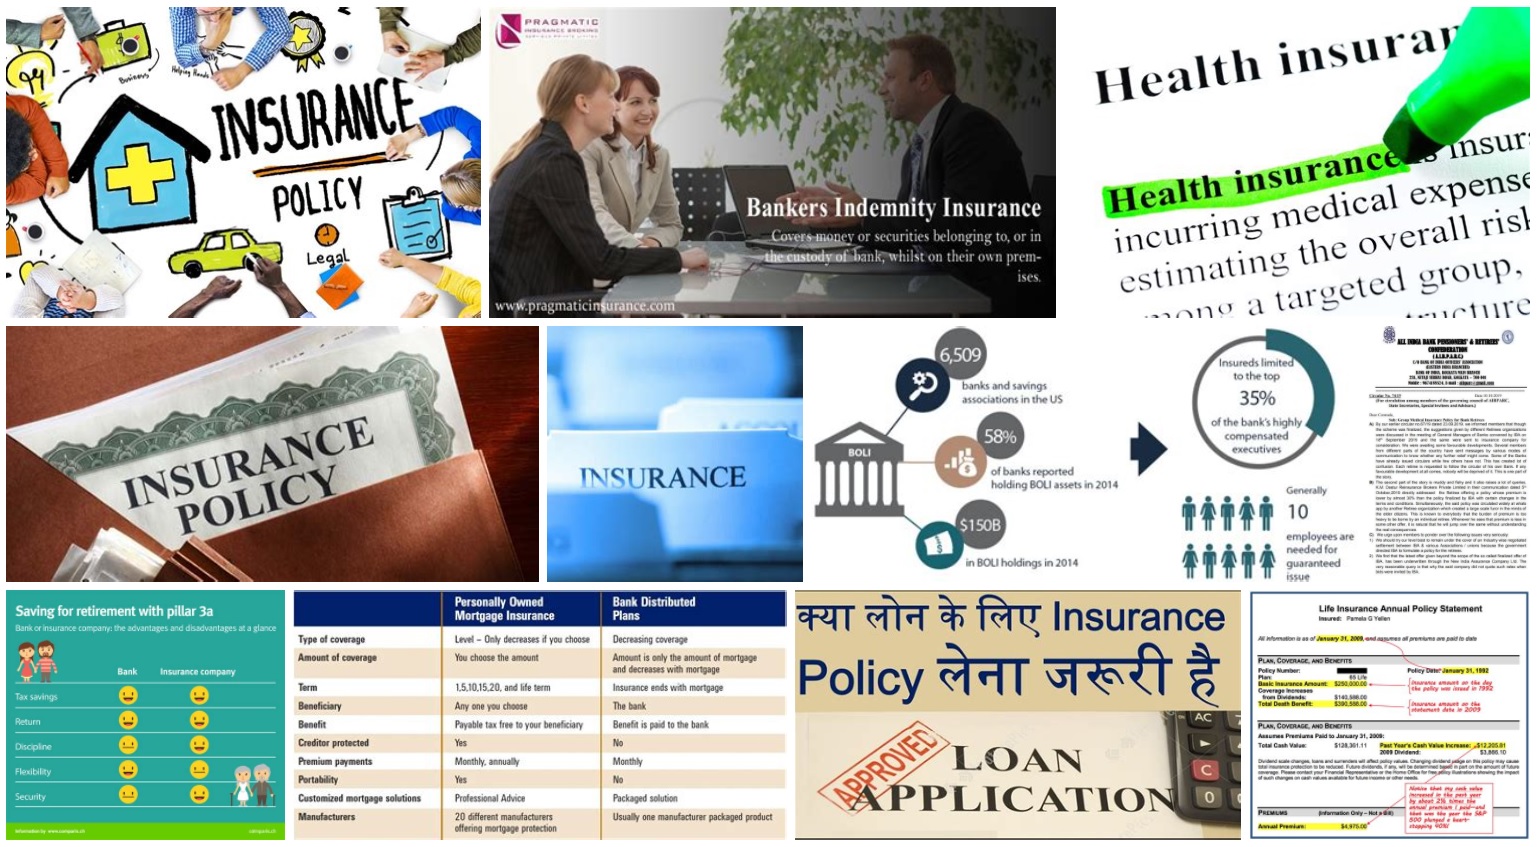 Insurance policies for banks